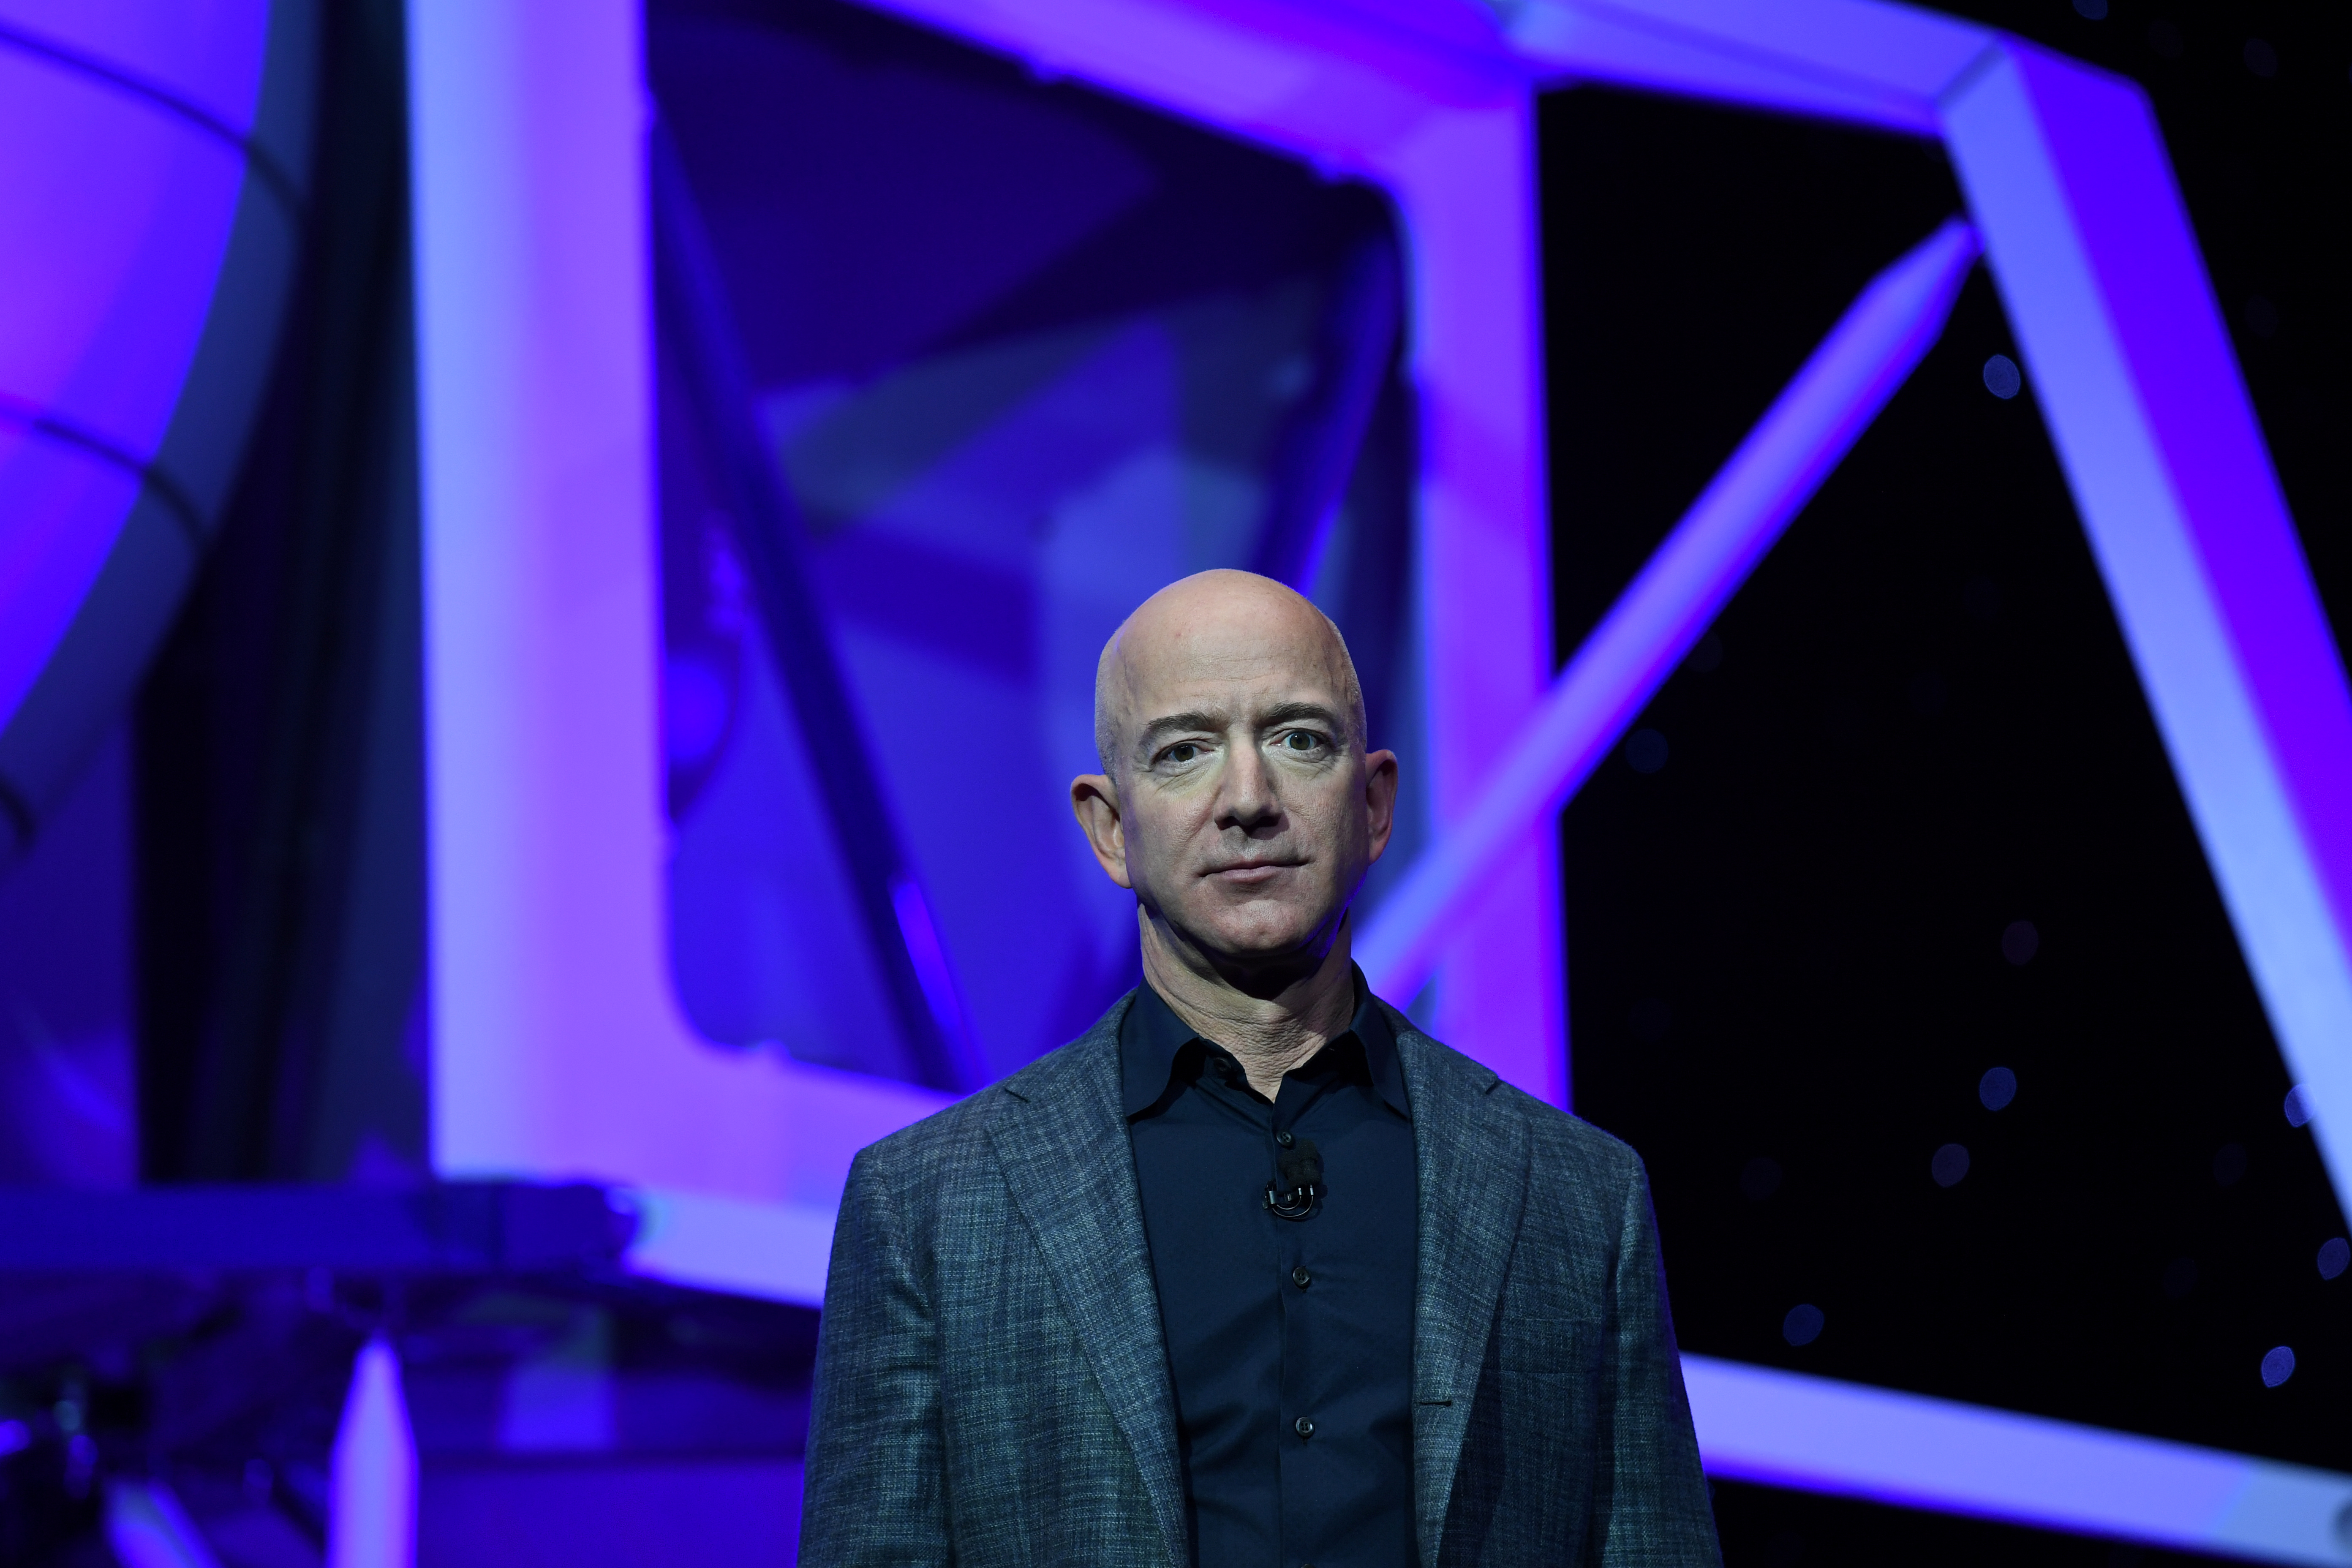 Founder, Chairman, CEO and President of Amazon Jeff Bezos unveils his space company Blue Origin's space exploration lunar lander rocket called Blue Moon during an unveiling event in Washington